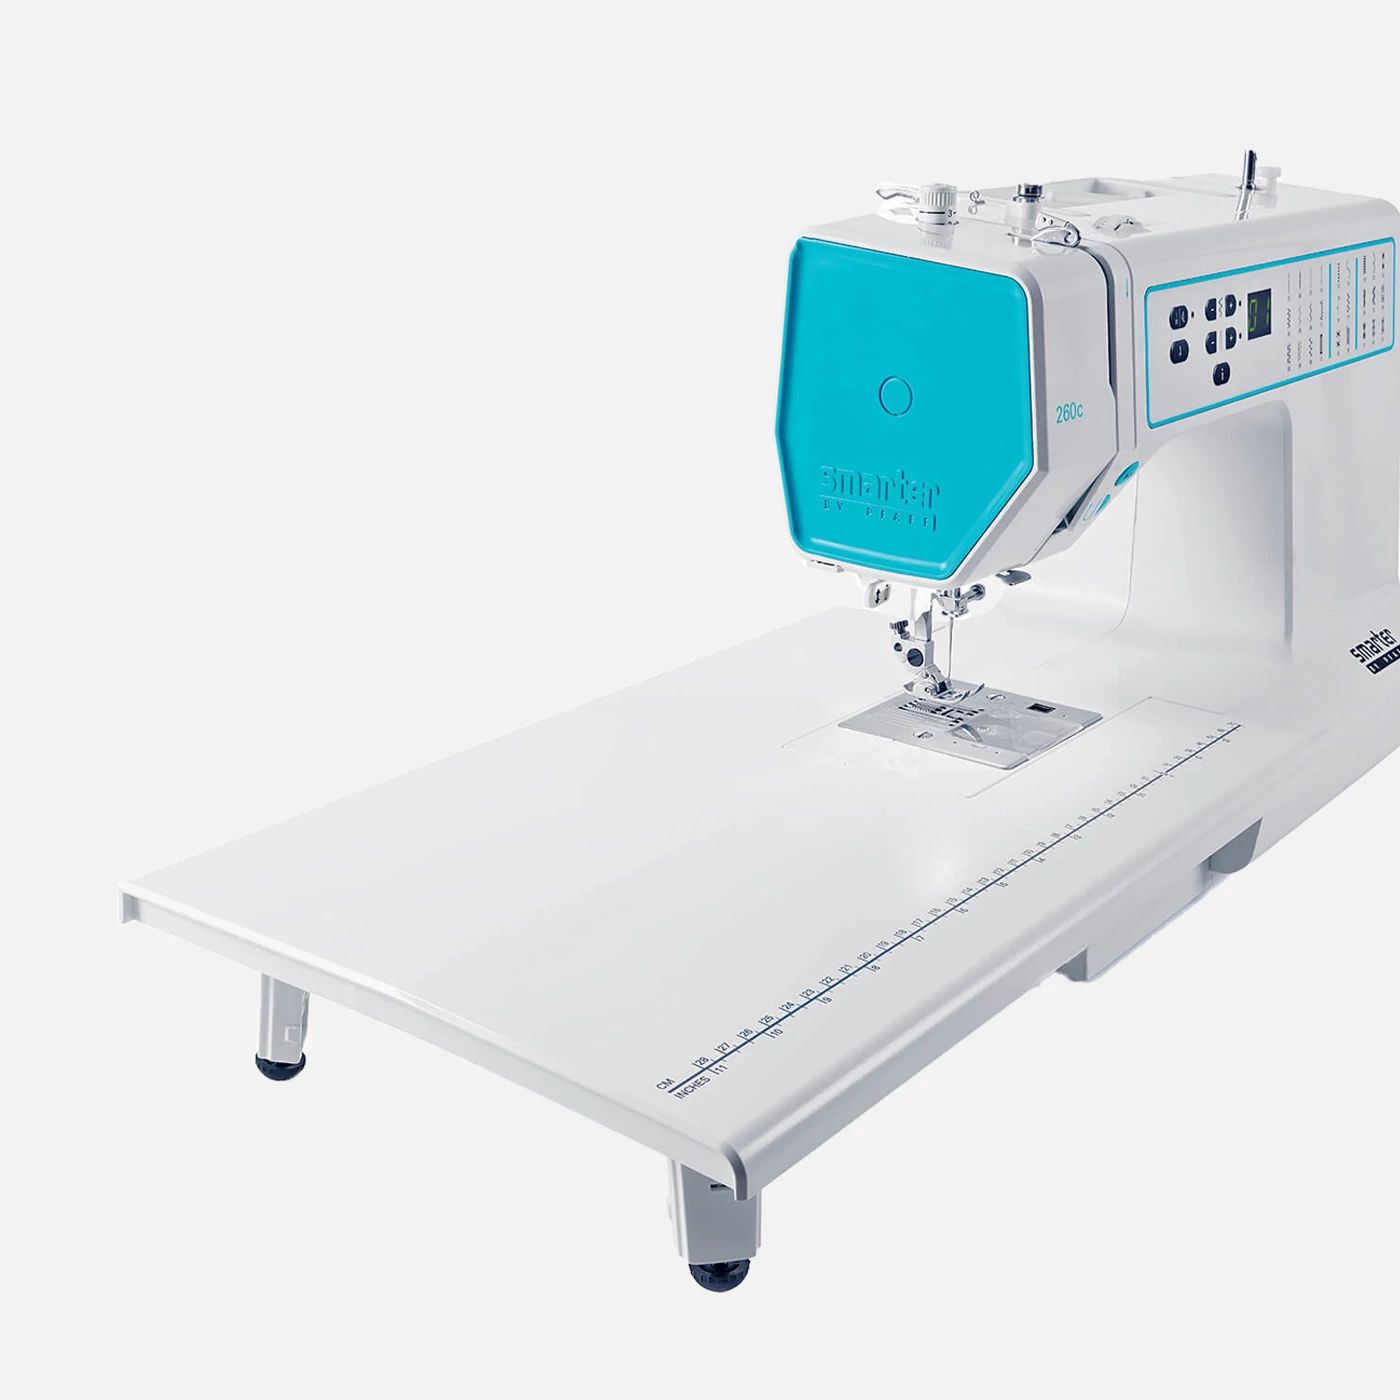 Sewing Machine Removable Extension Table Comfortable Sewing Machine  Extension Table for Household Desktop JA002 86K AS1450 